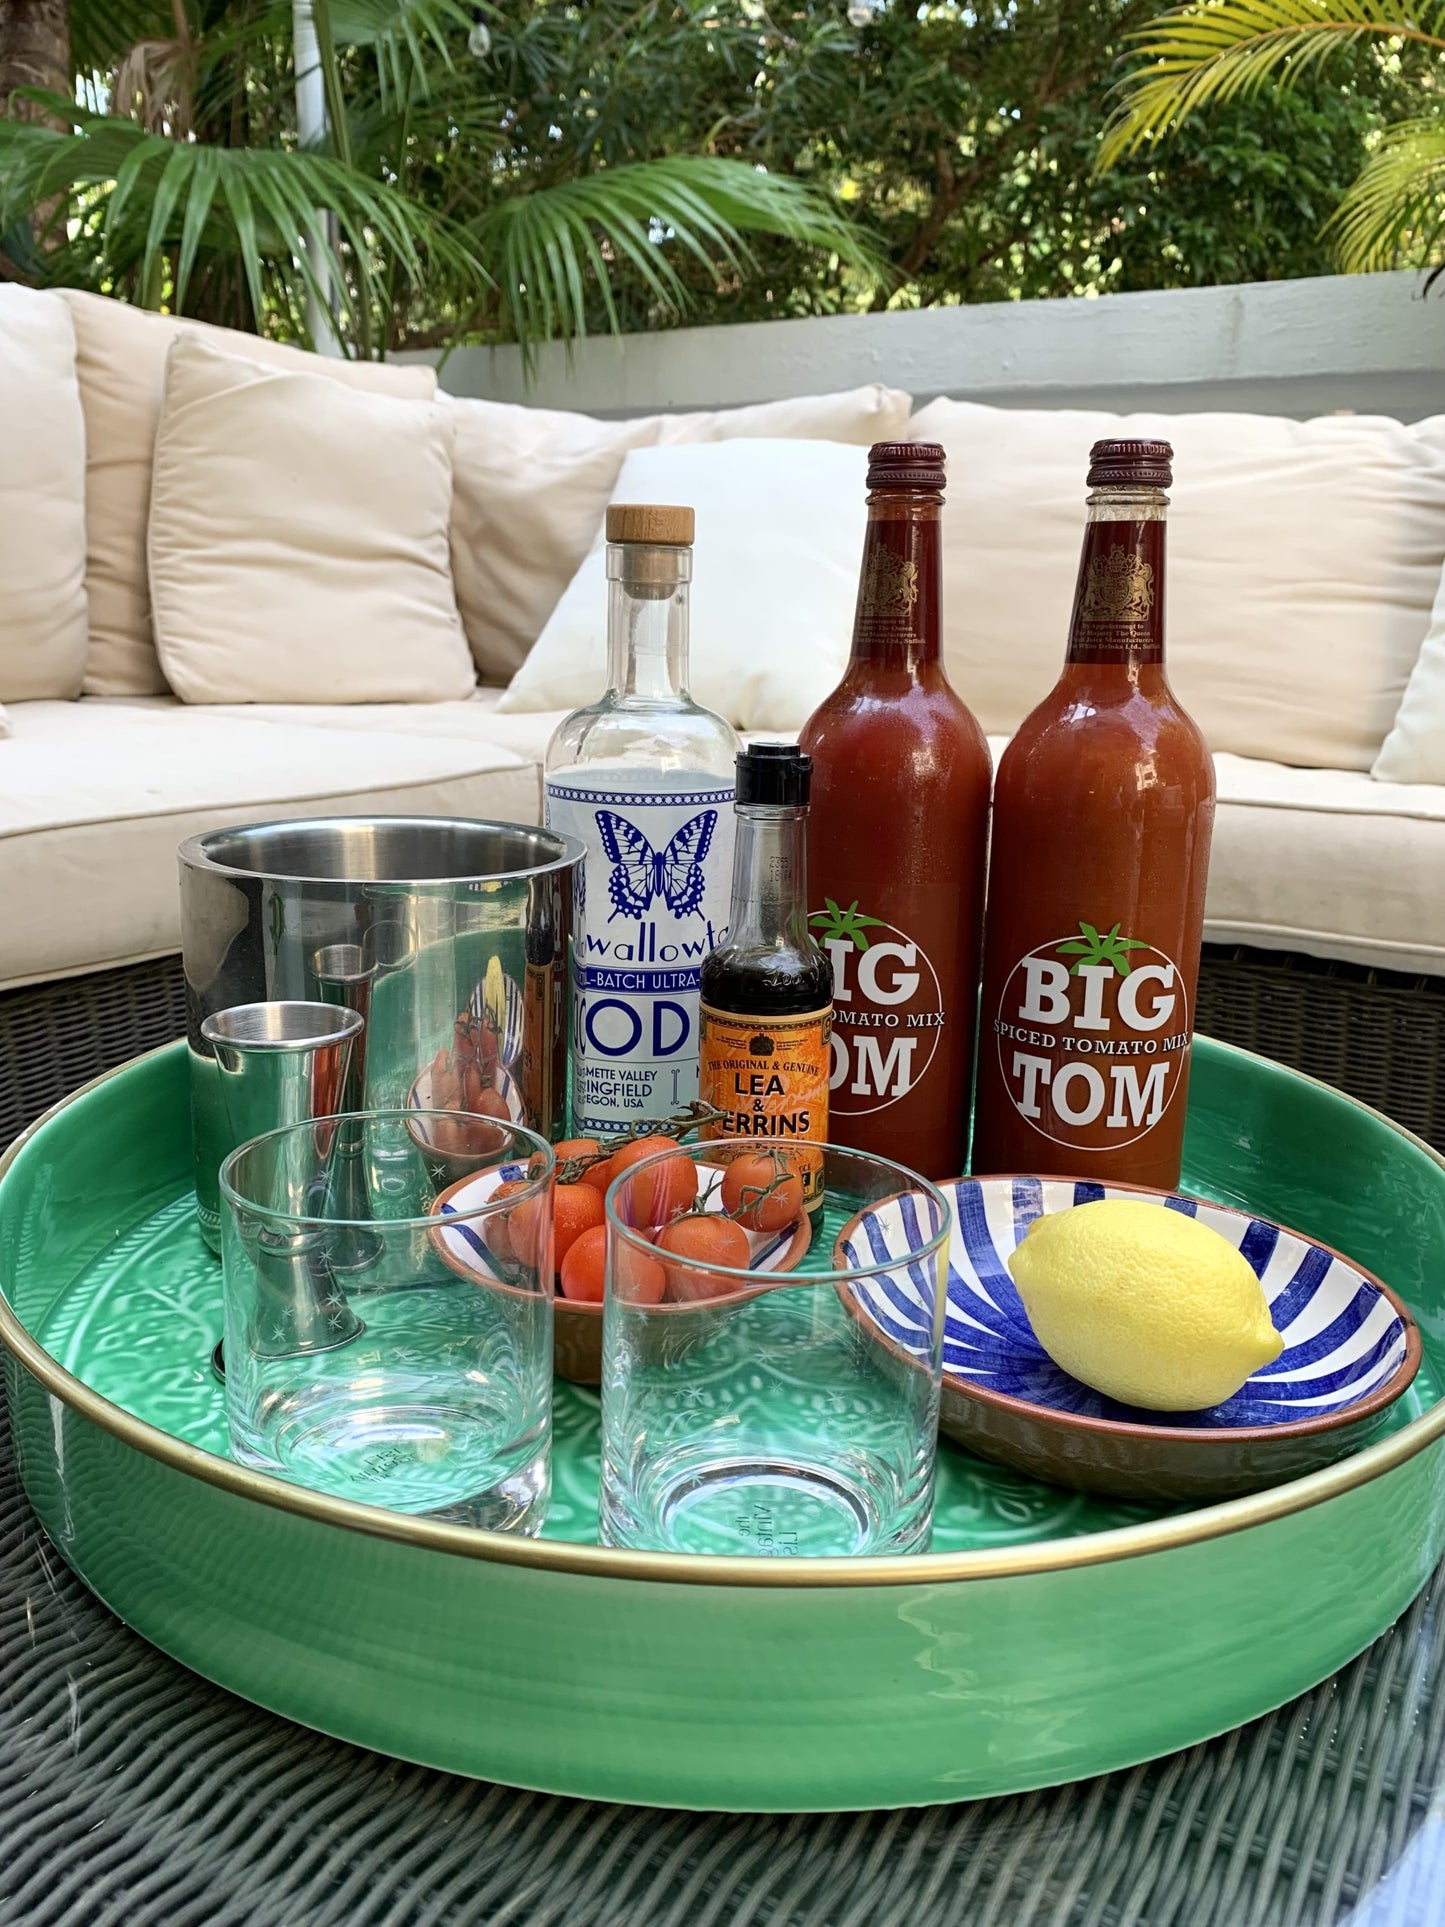 A large green enamel tray being used as a drinks tray for bloody marys.